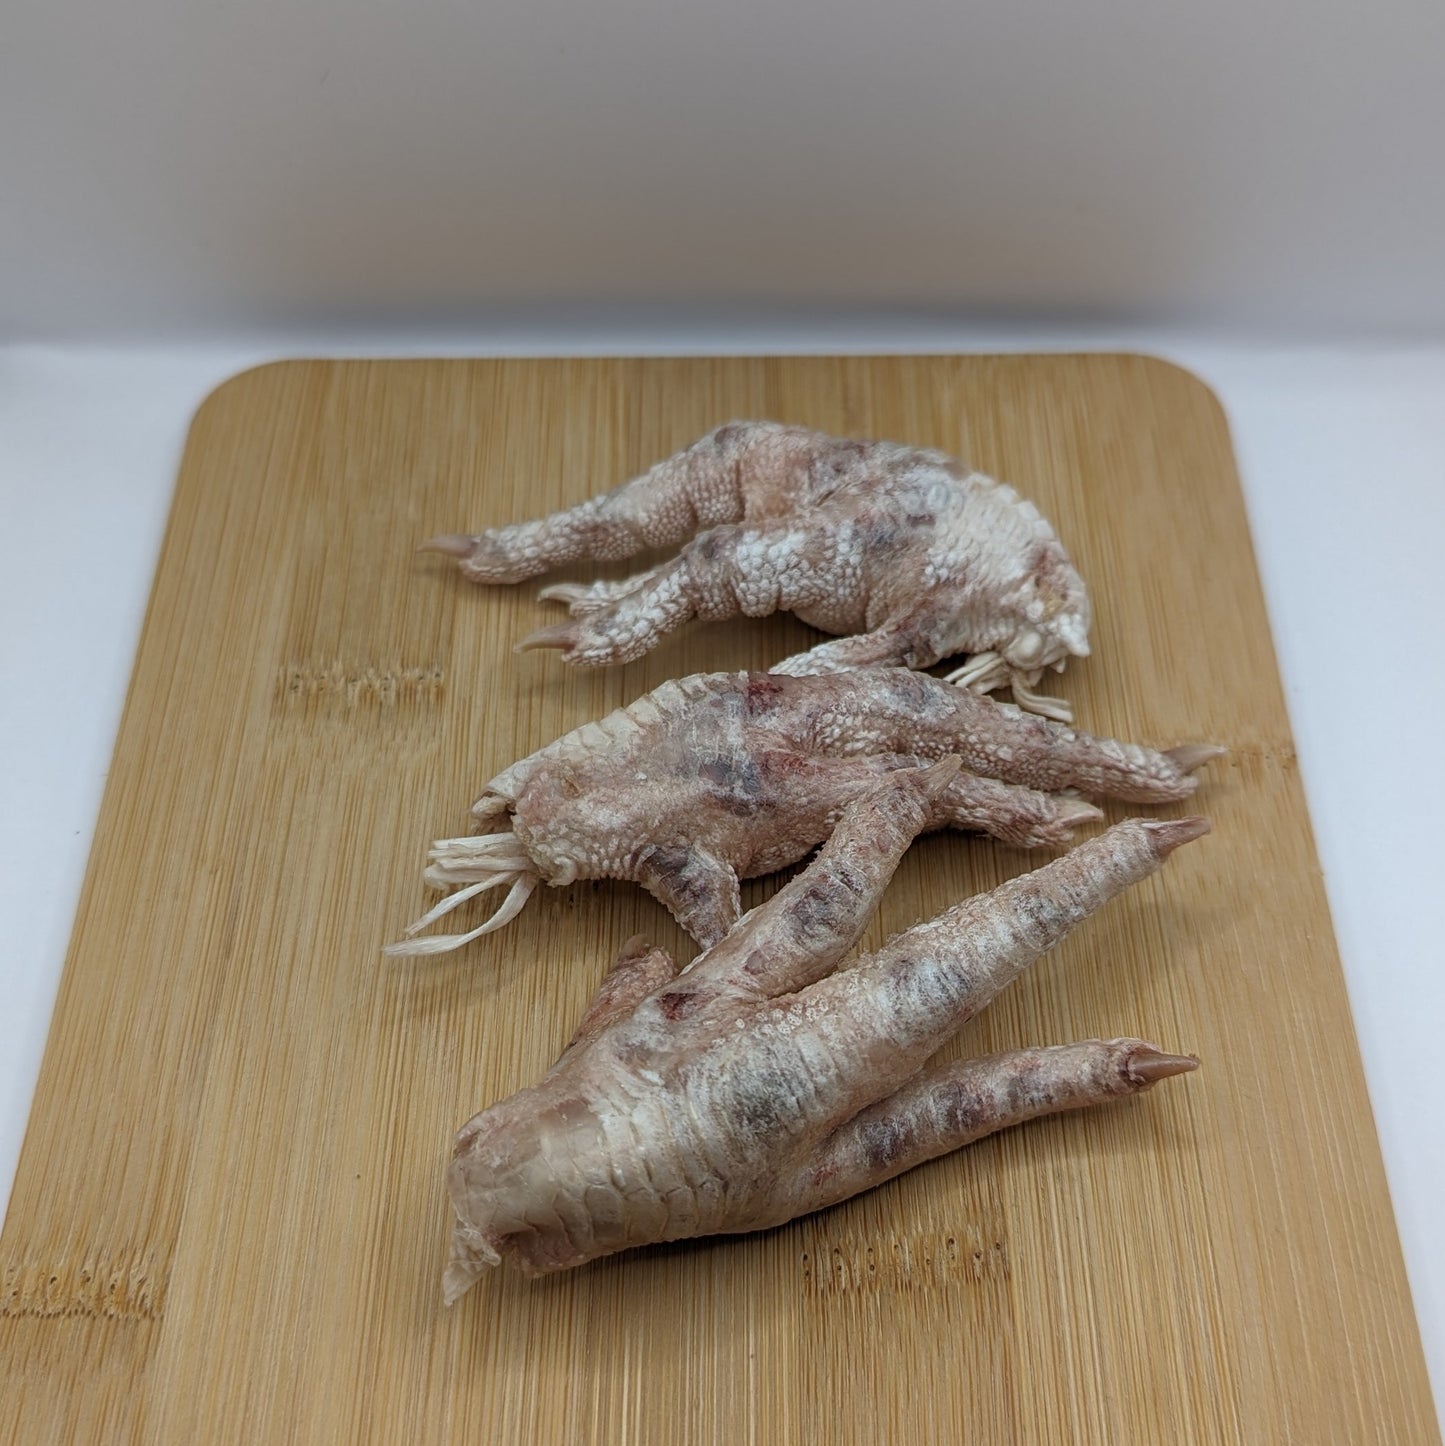 Three Freeze-Dried Chicken Feet from Beast Feast, adhering to the Better Chicken Commitment standards, on a wooden cutting board.